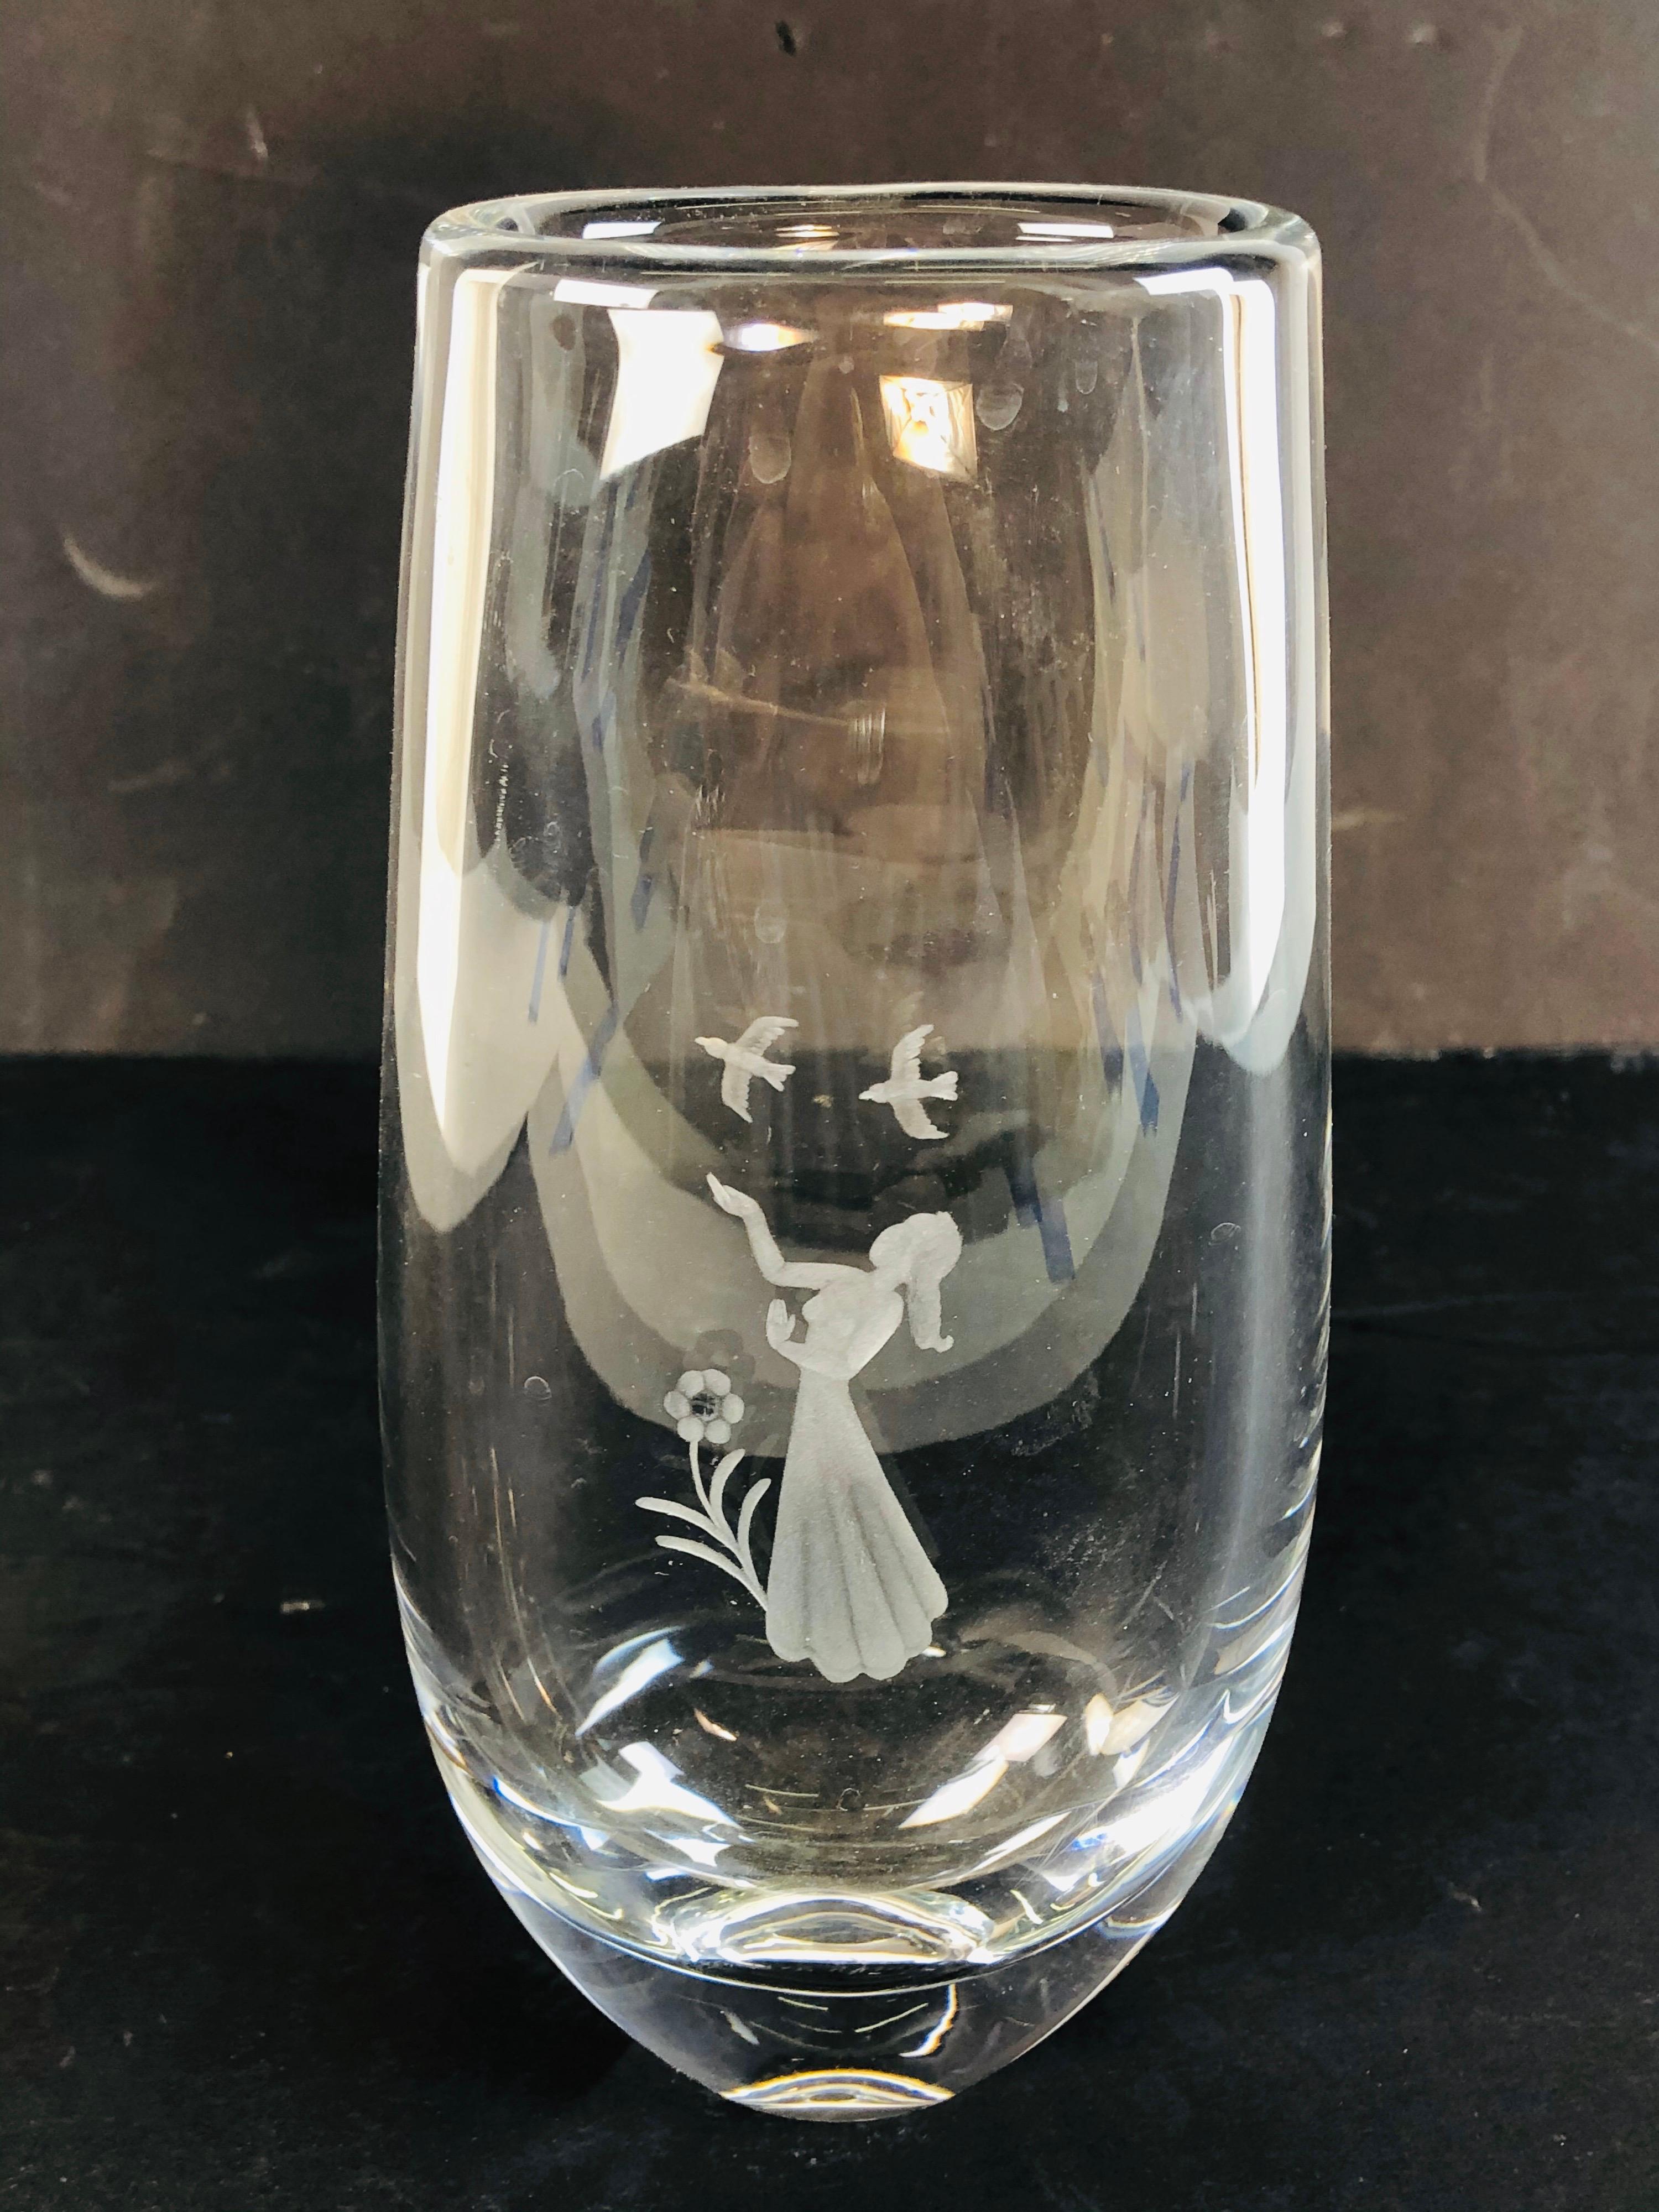 1960s glass vase by Orrefors with girl with birds etched scene. Hand blown and marked underneath.